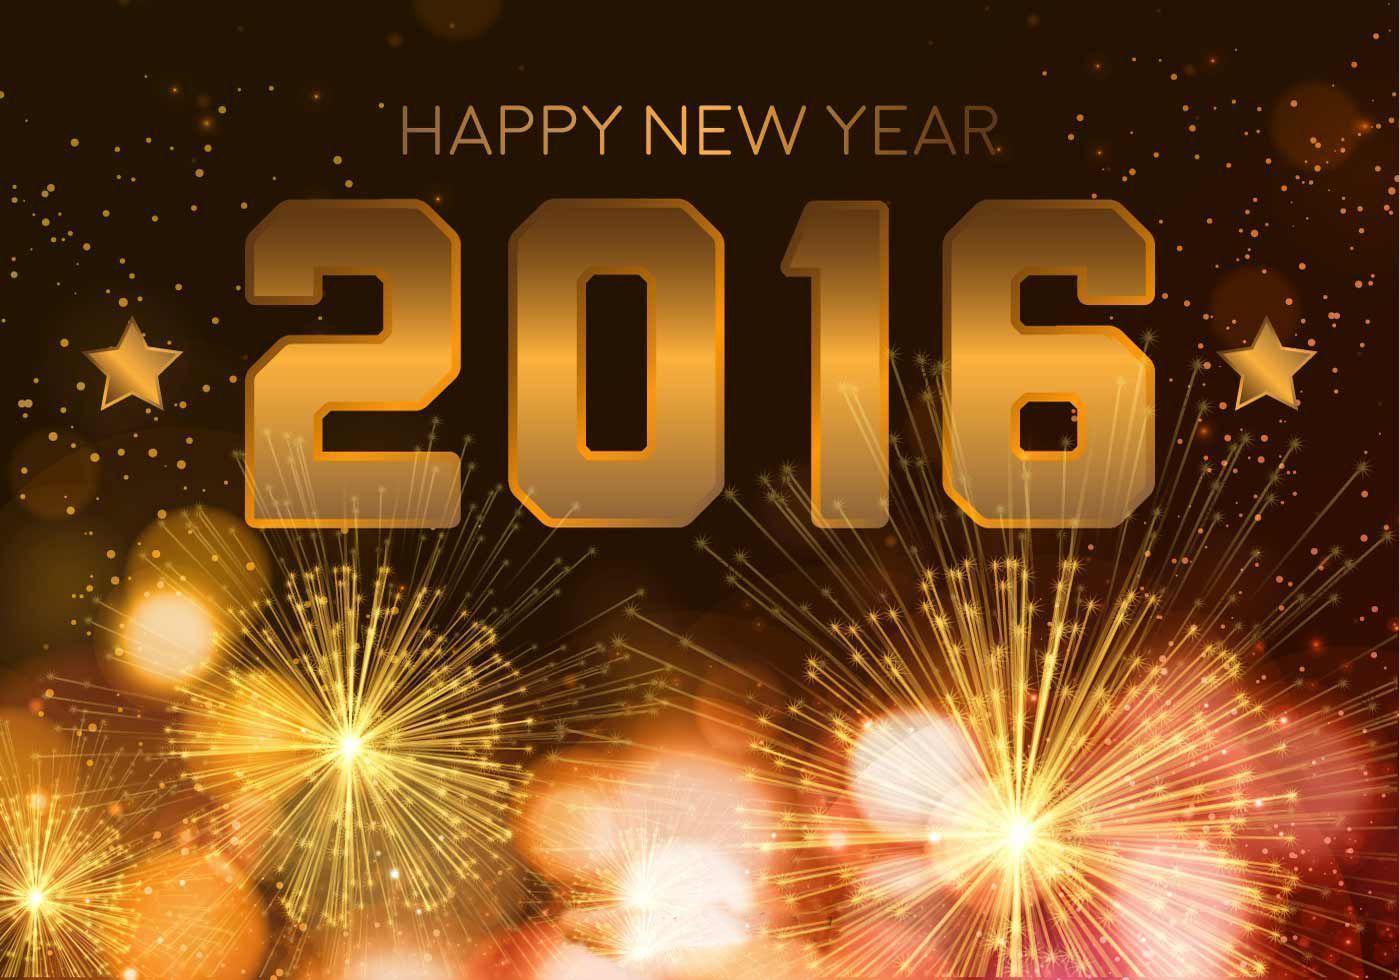 Happy New Year 2016 SMS And HD Wallpaper Free Download And Share